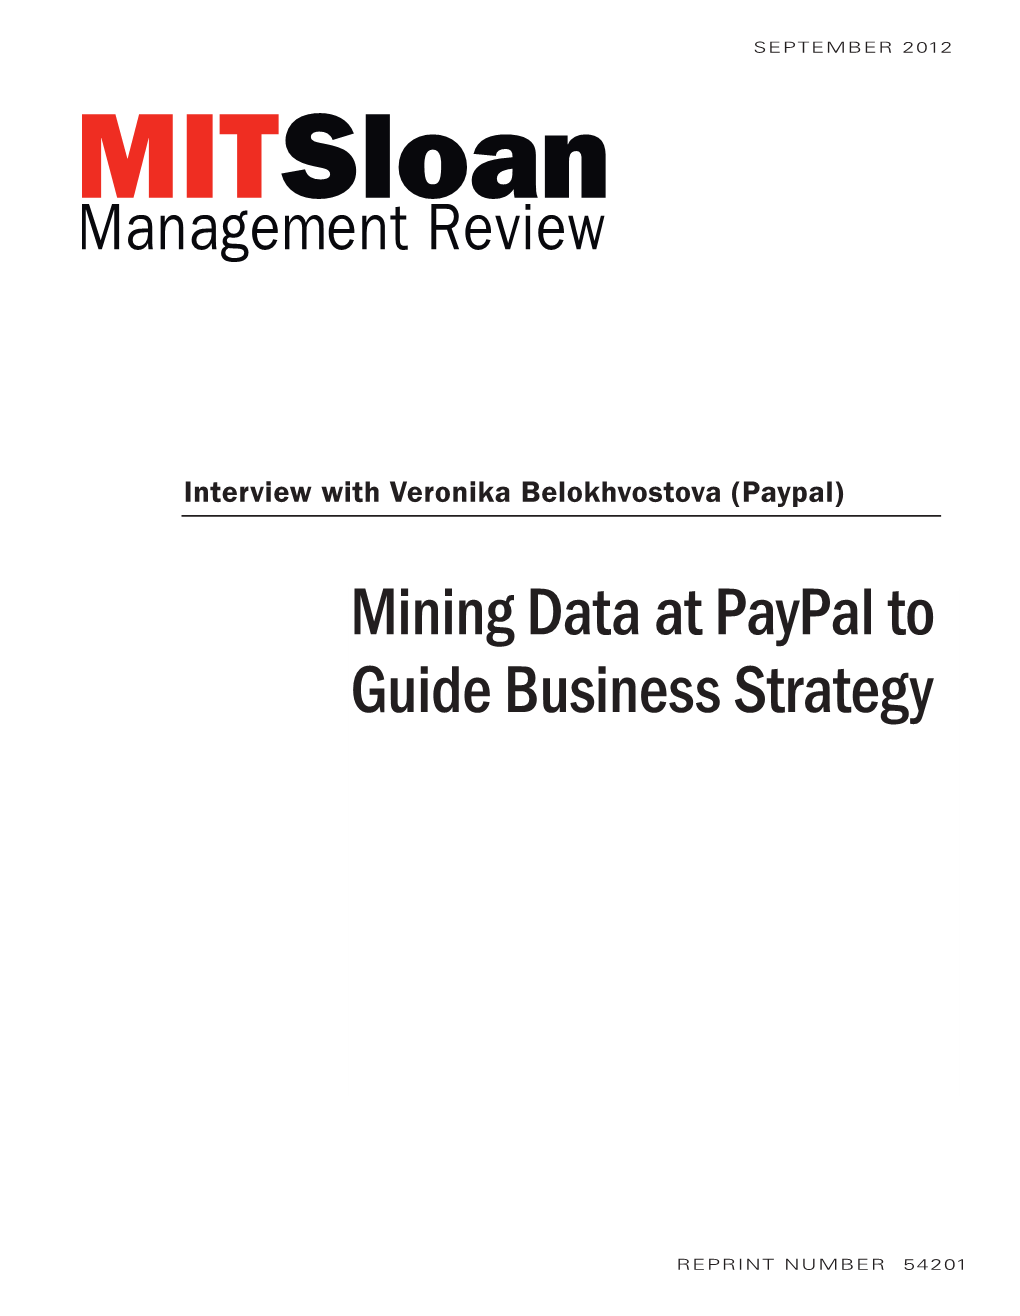 Mining Data at Paypal to Guide Business Strategy